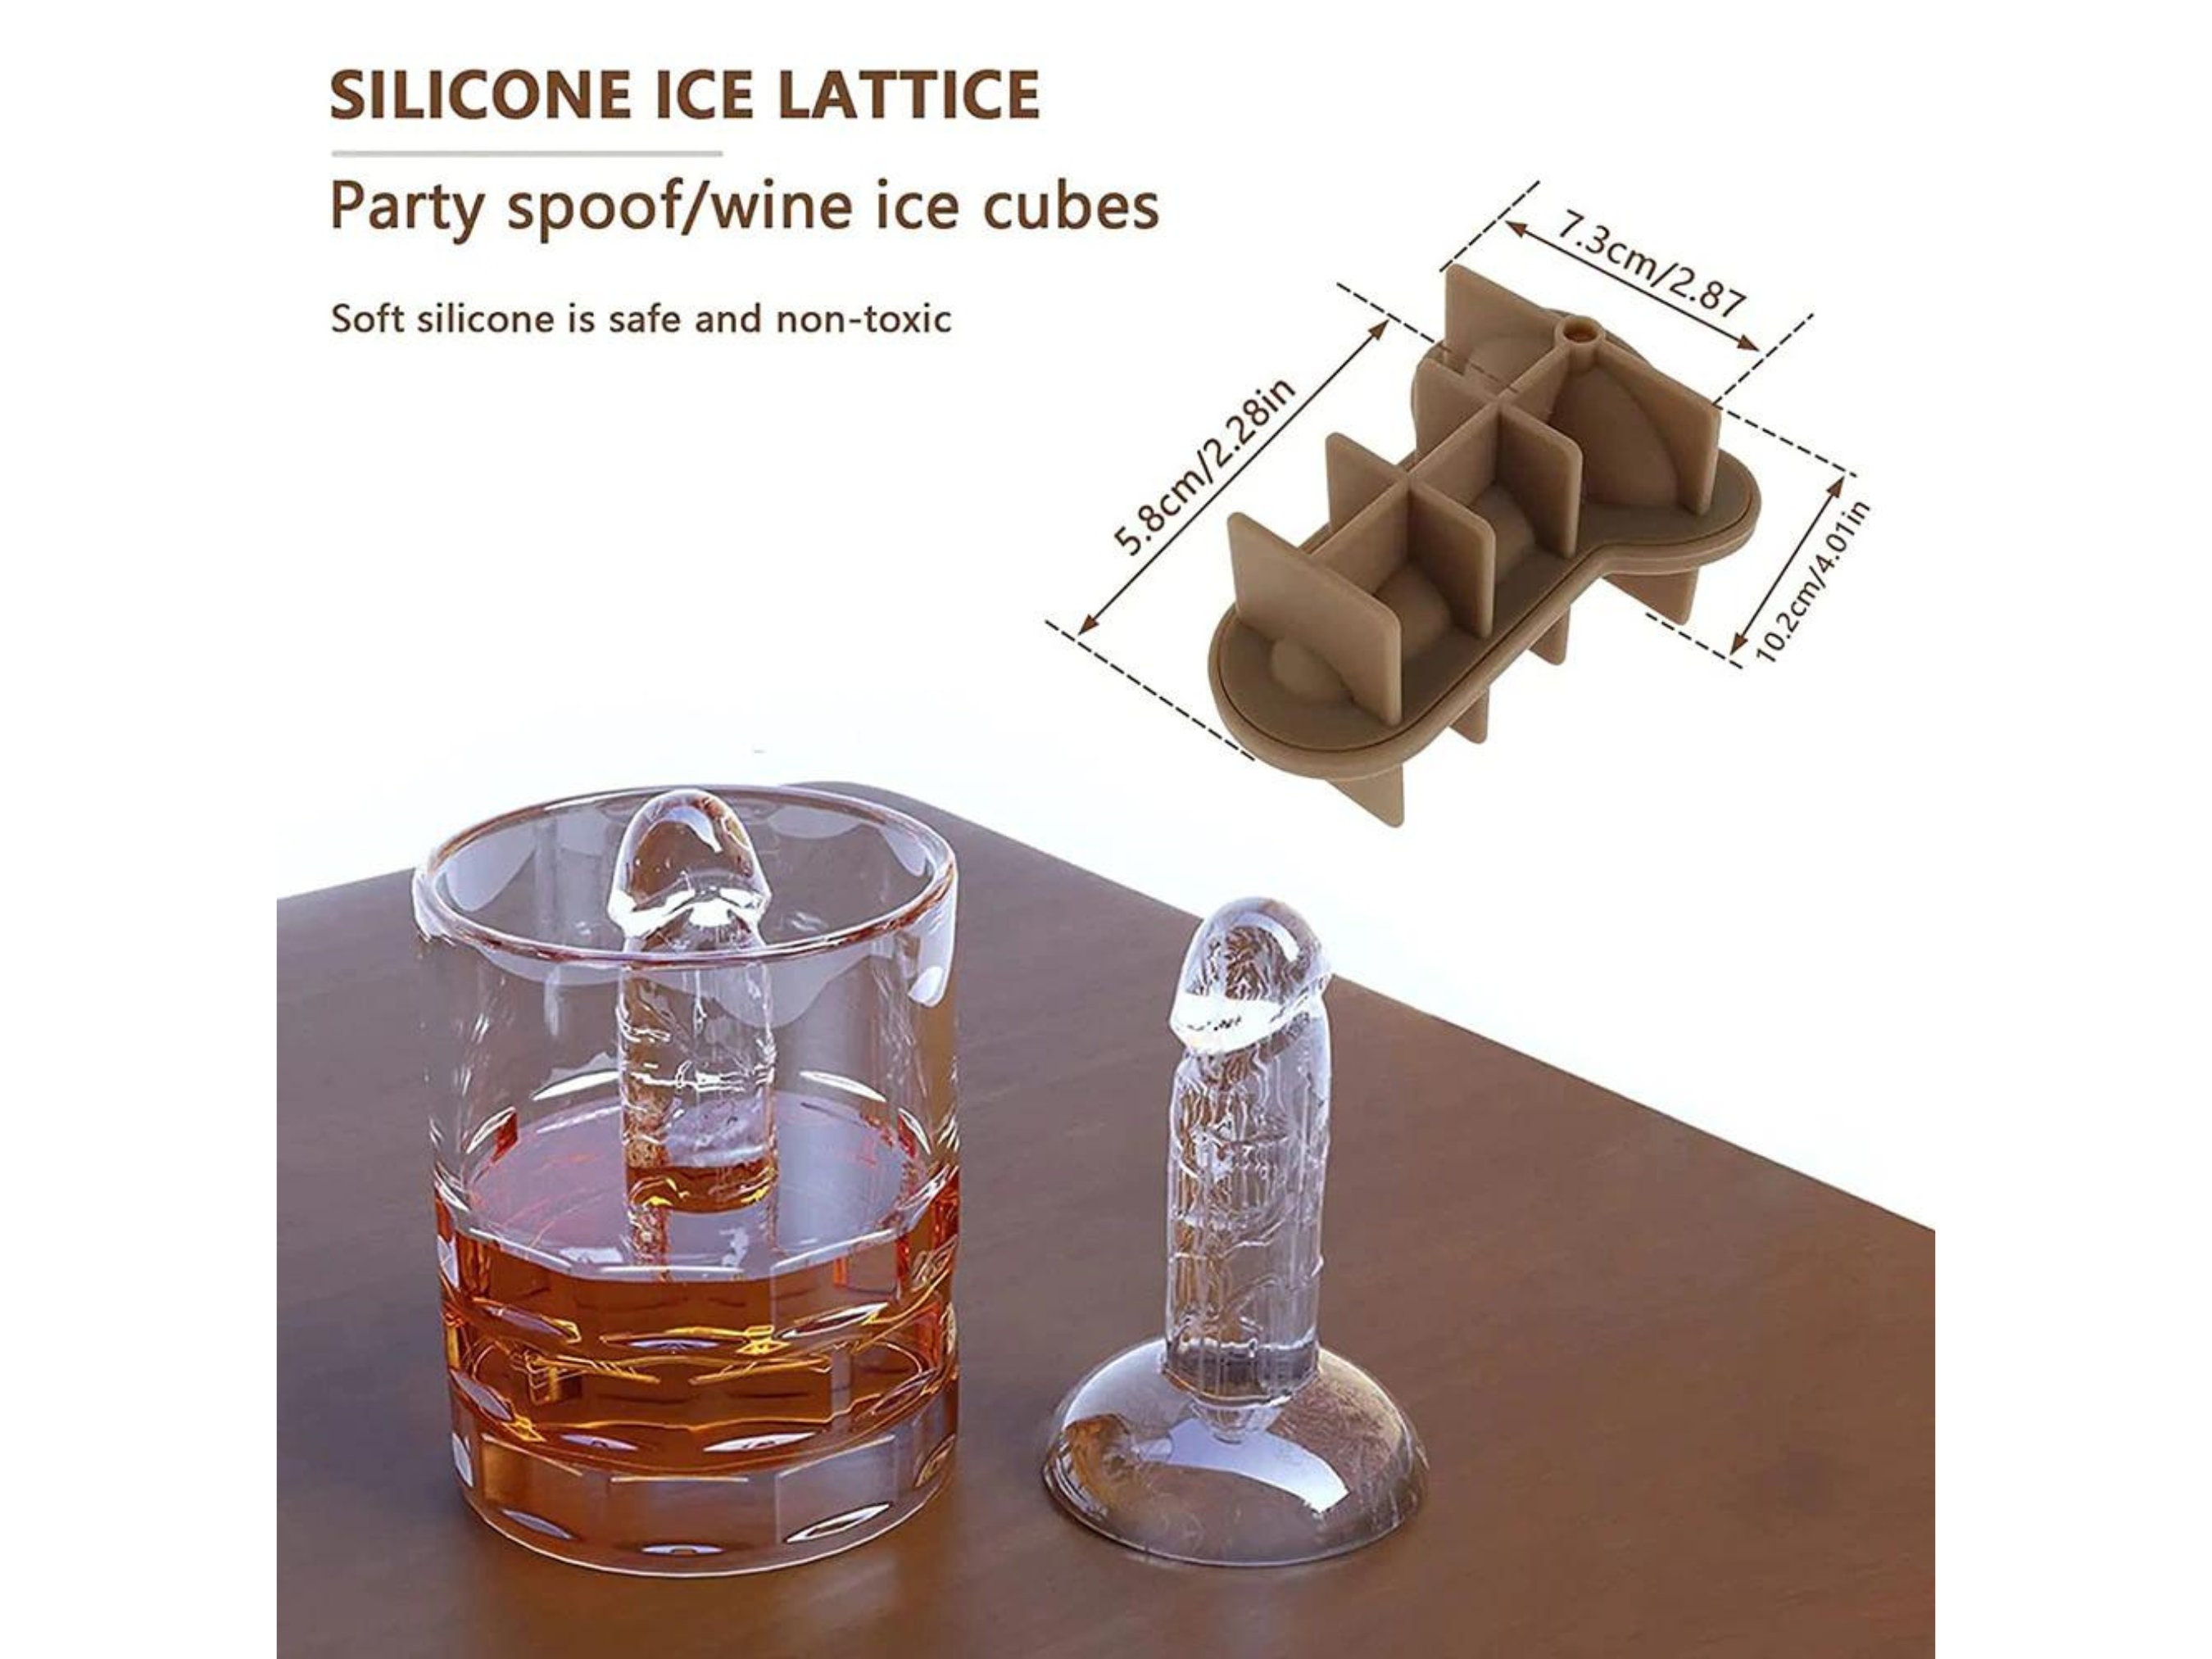 Prank Ice Cube Molds For Adults, Novelty Ice Cube Trays Prank